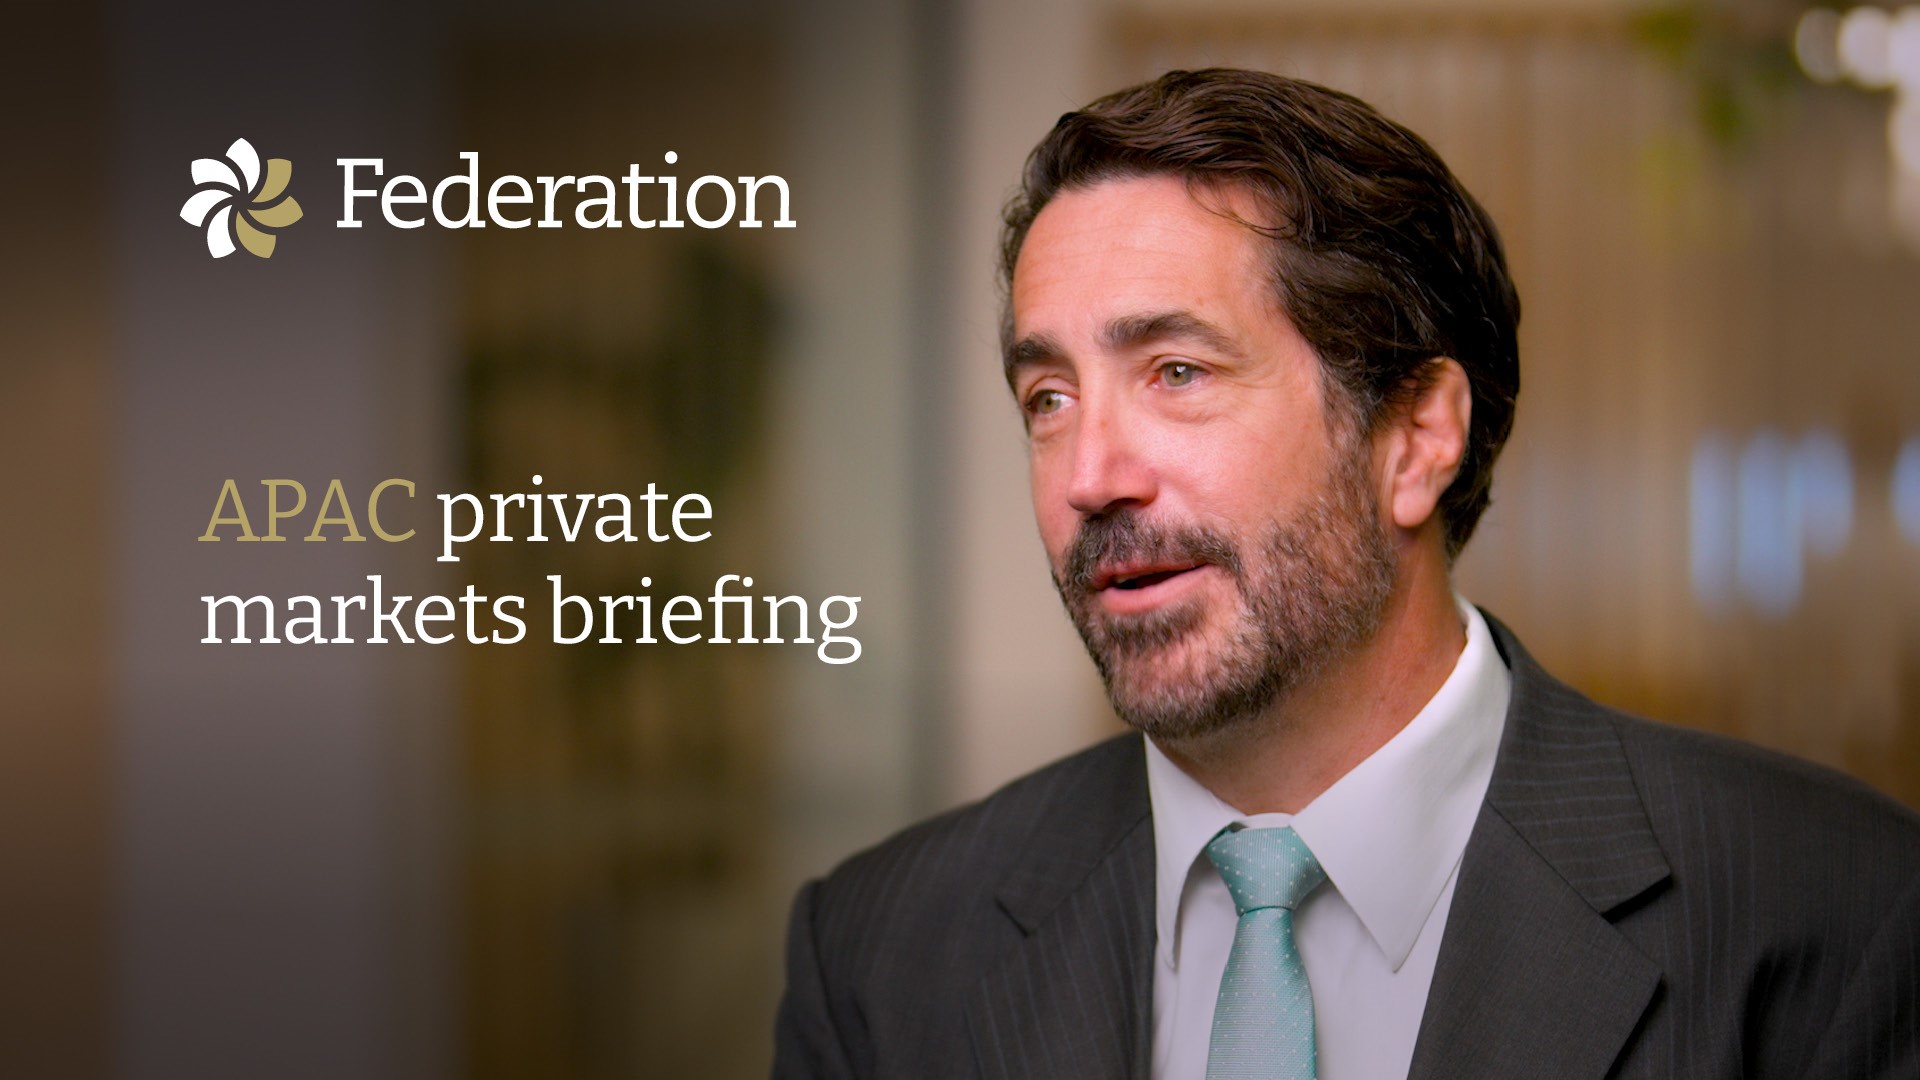 APAC private markets briefing